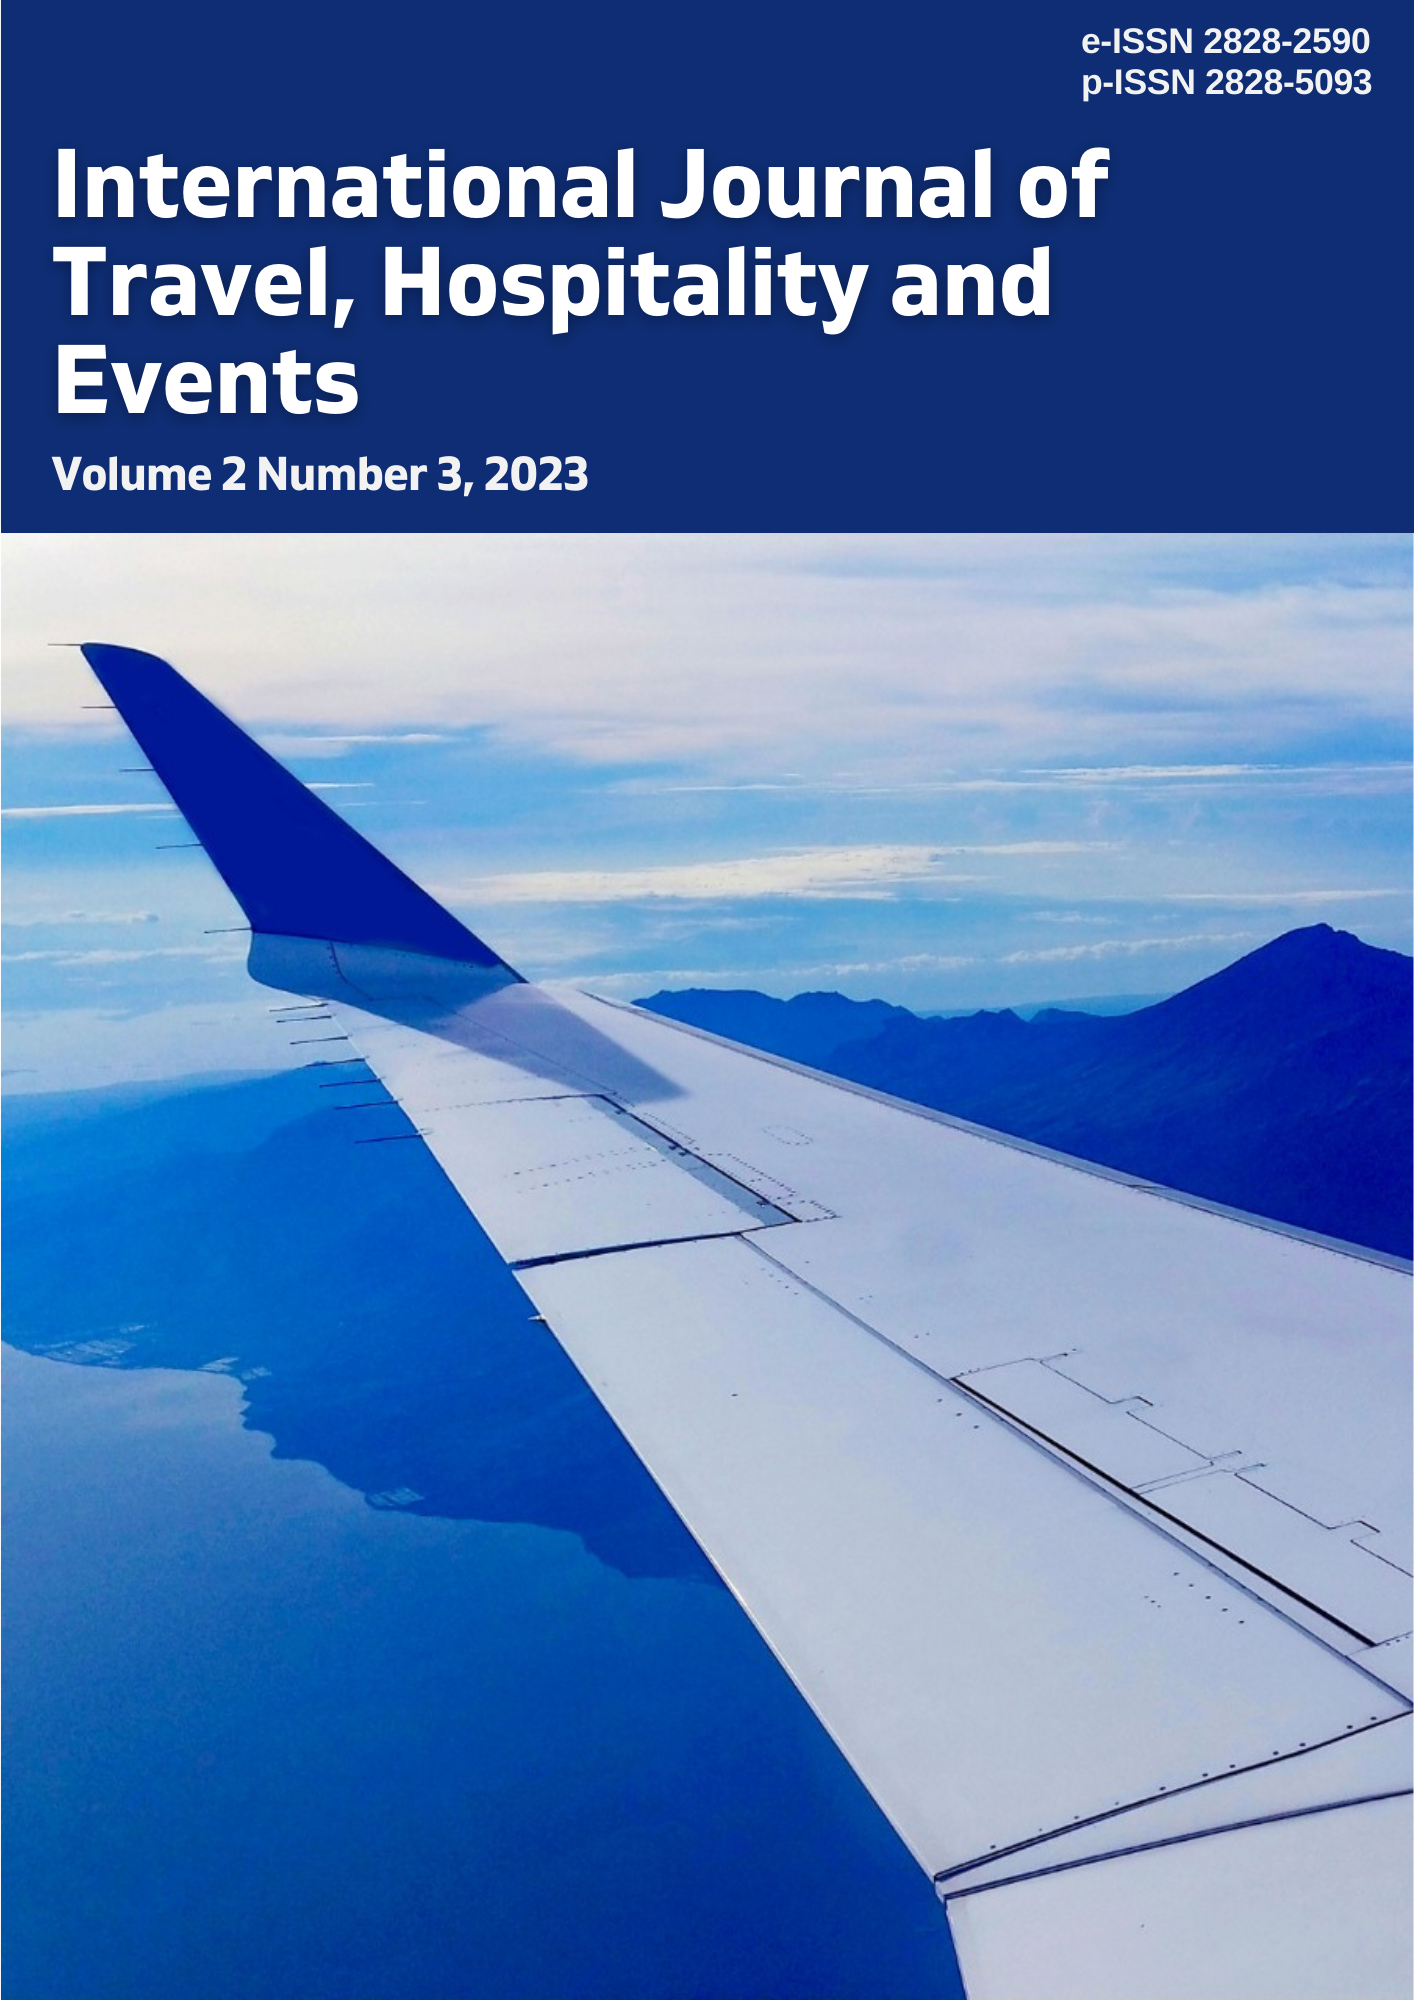 					View Vol. 2 No. 3 (2023): International Journal of Travel, Hospitality and Events
				